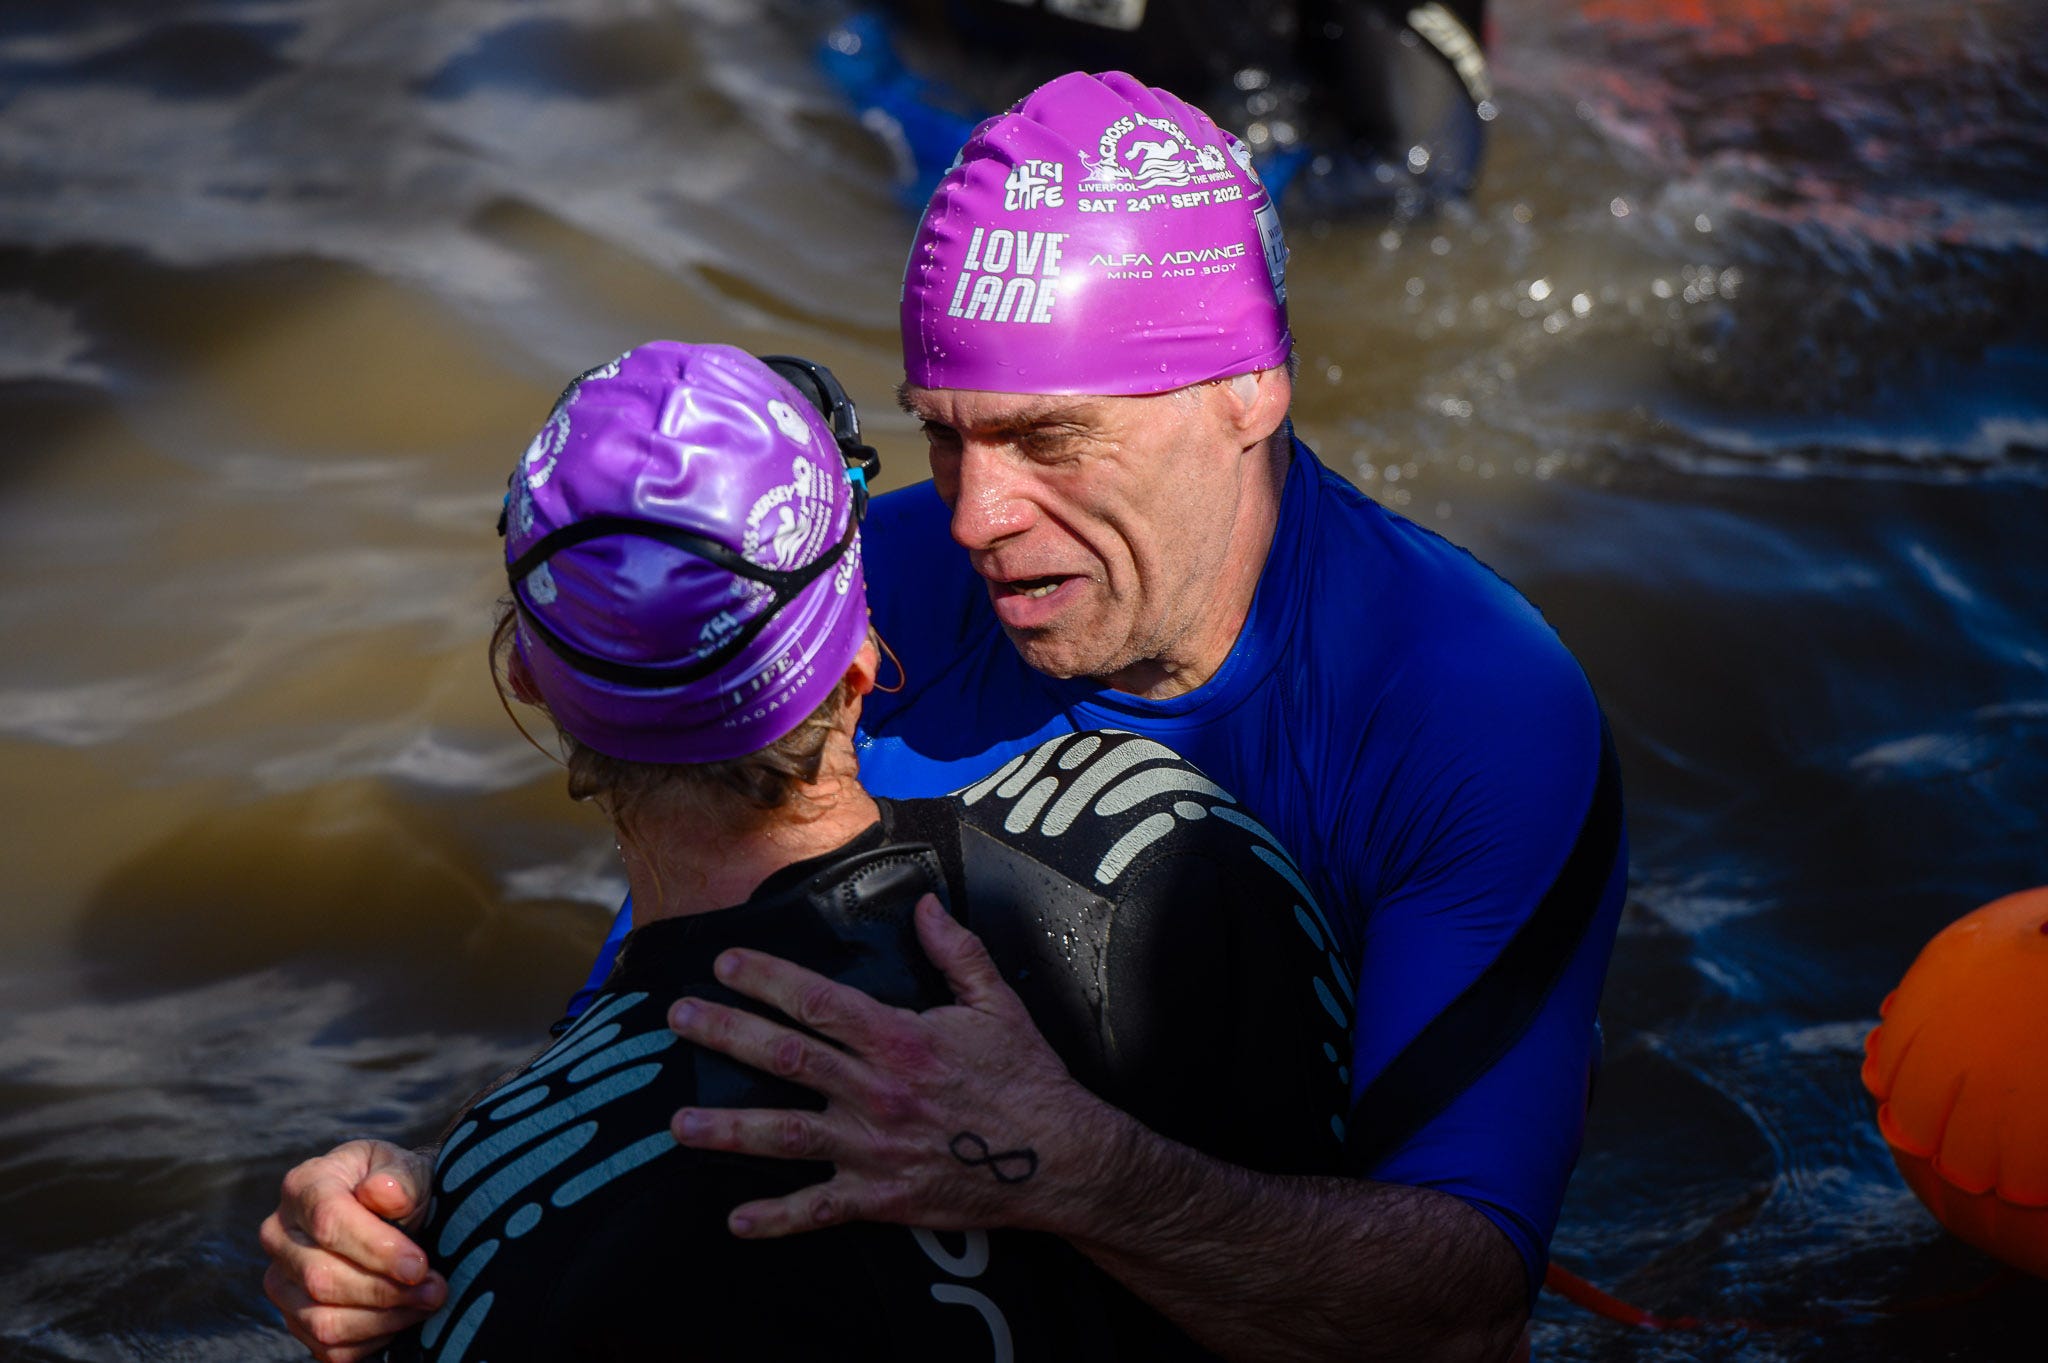 Two people embrace after finishing a 2 mile swim.